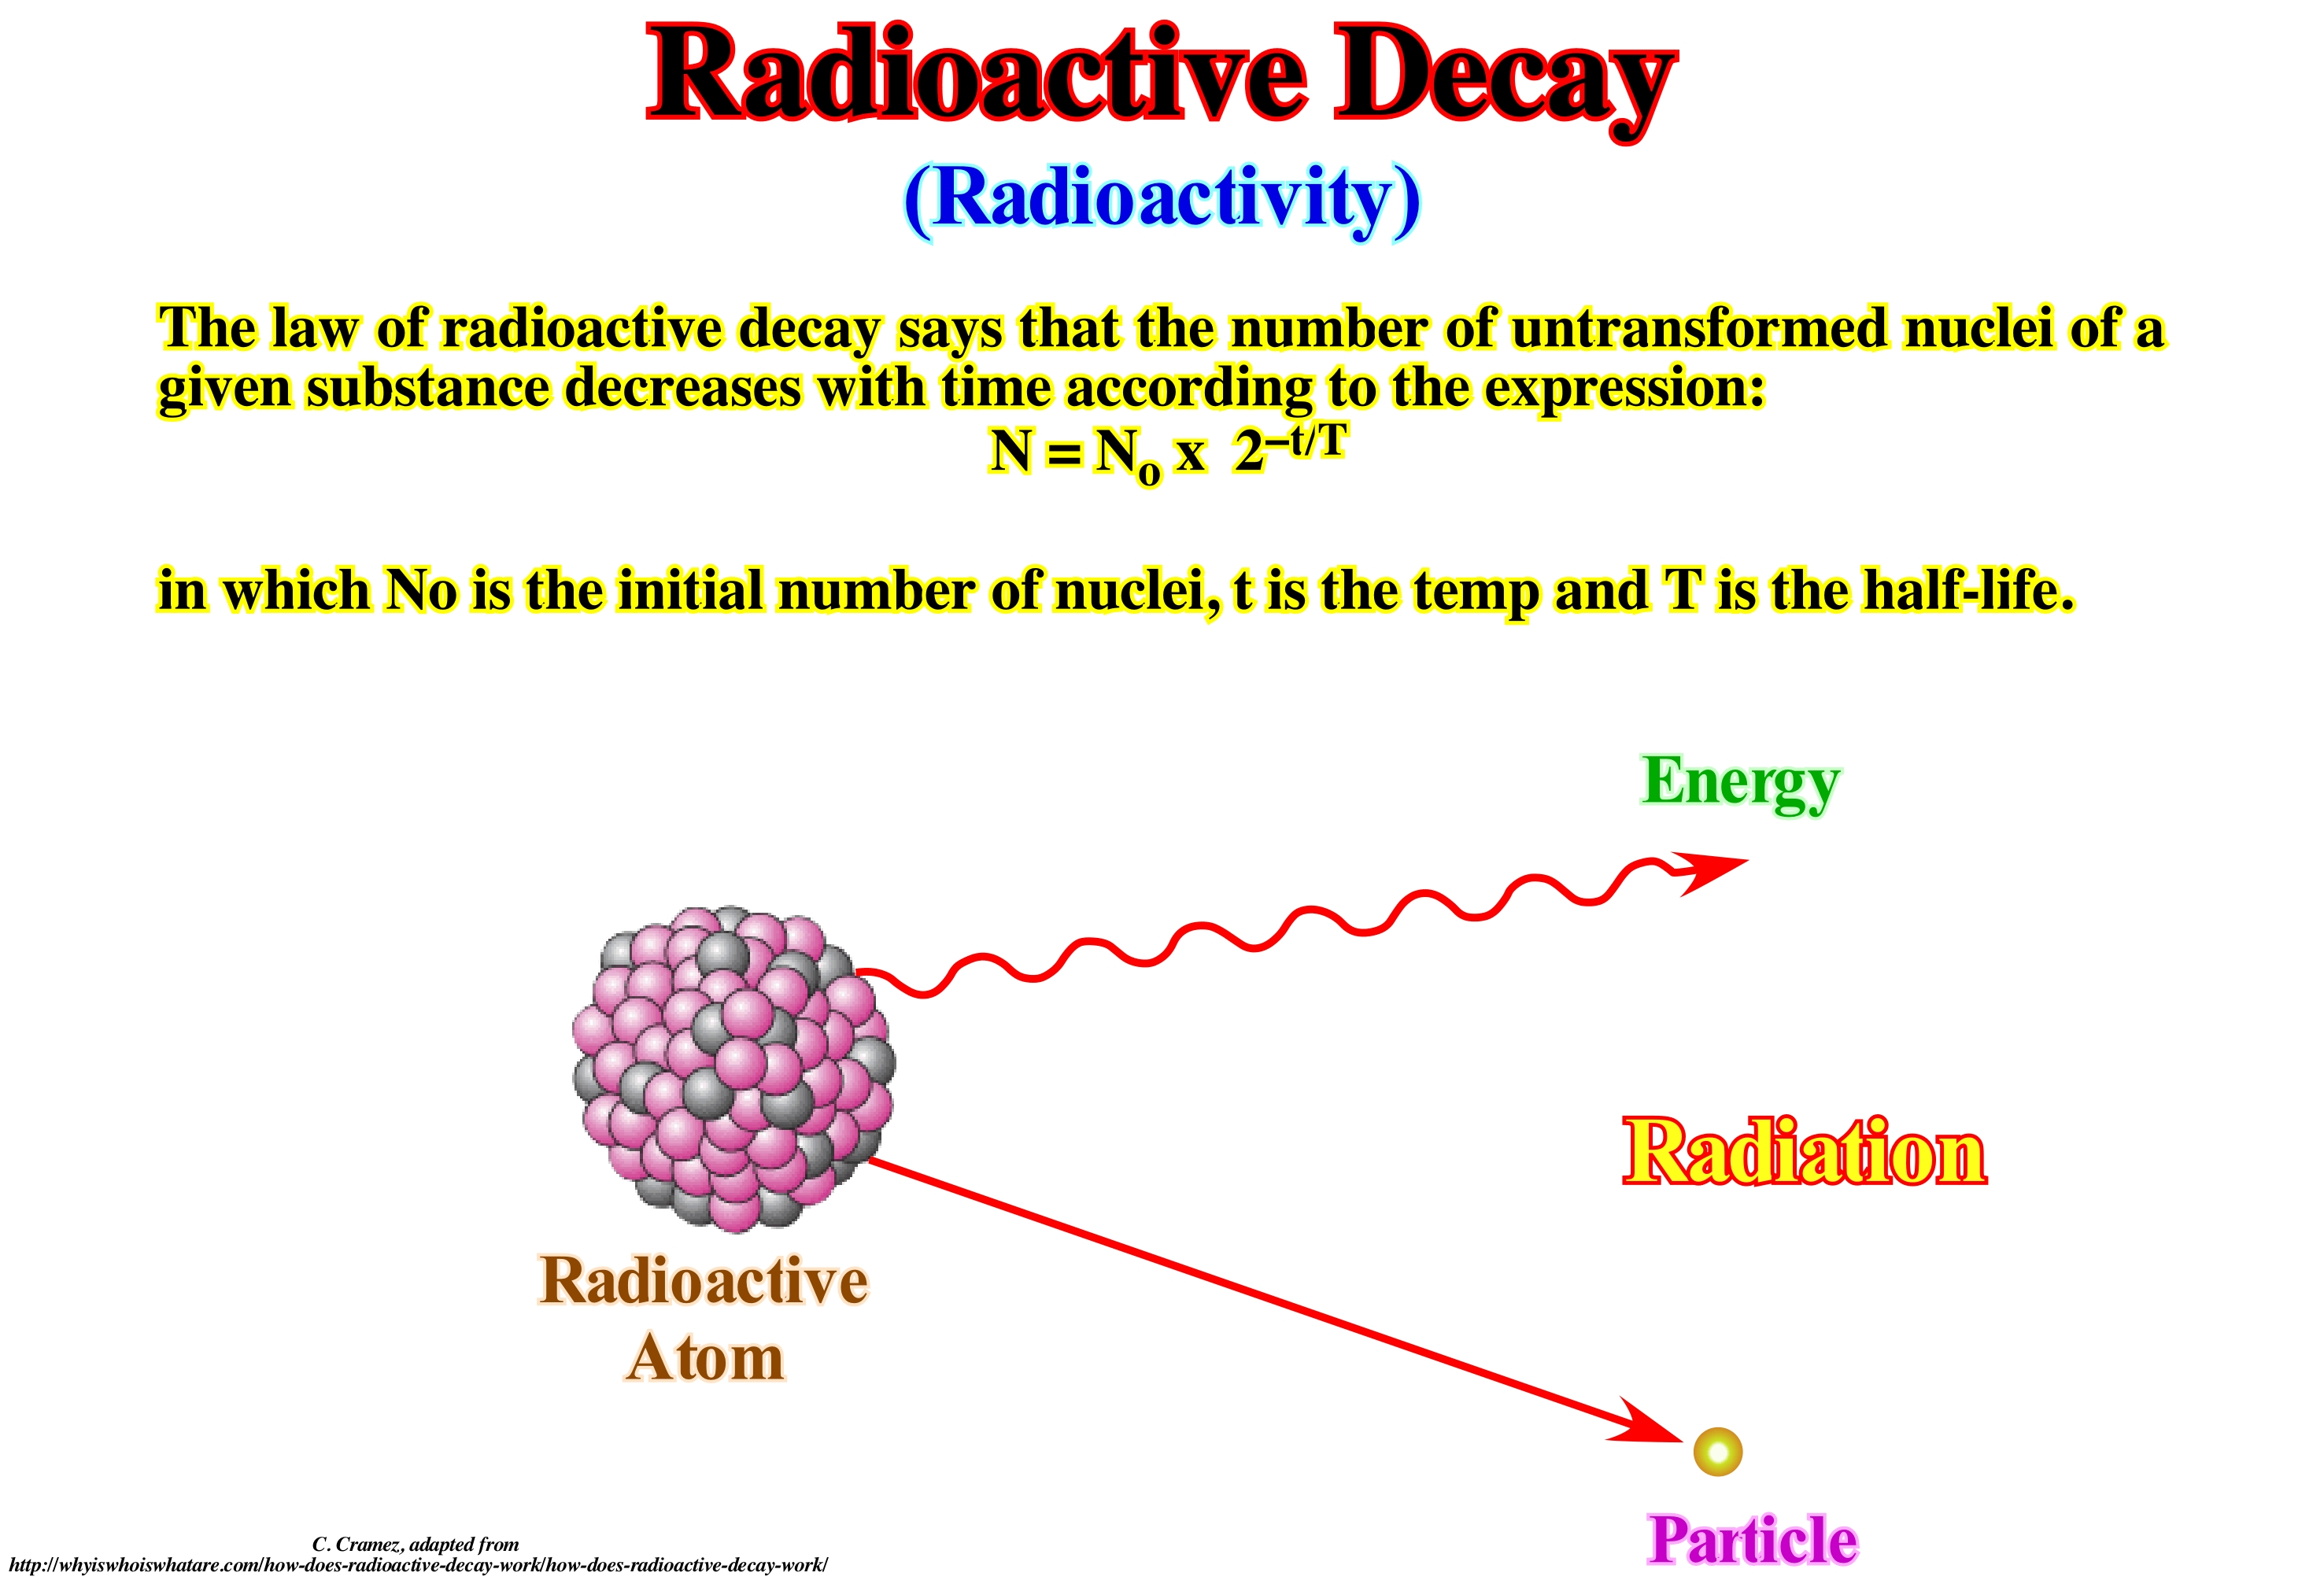 How is radiometric dating used to date organic materials?